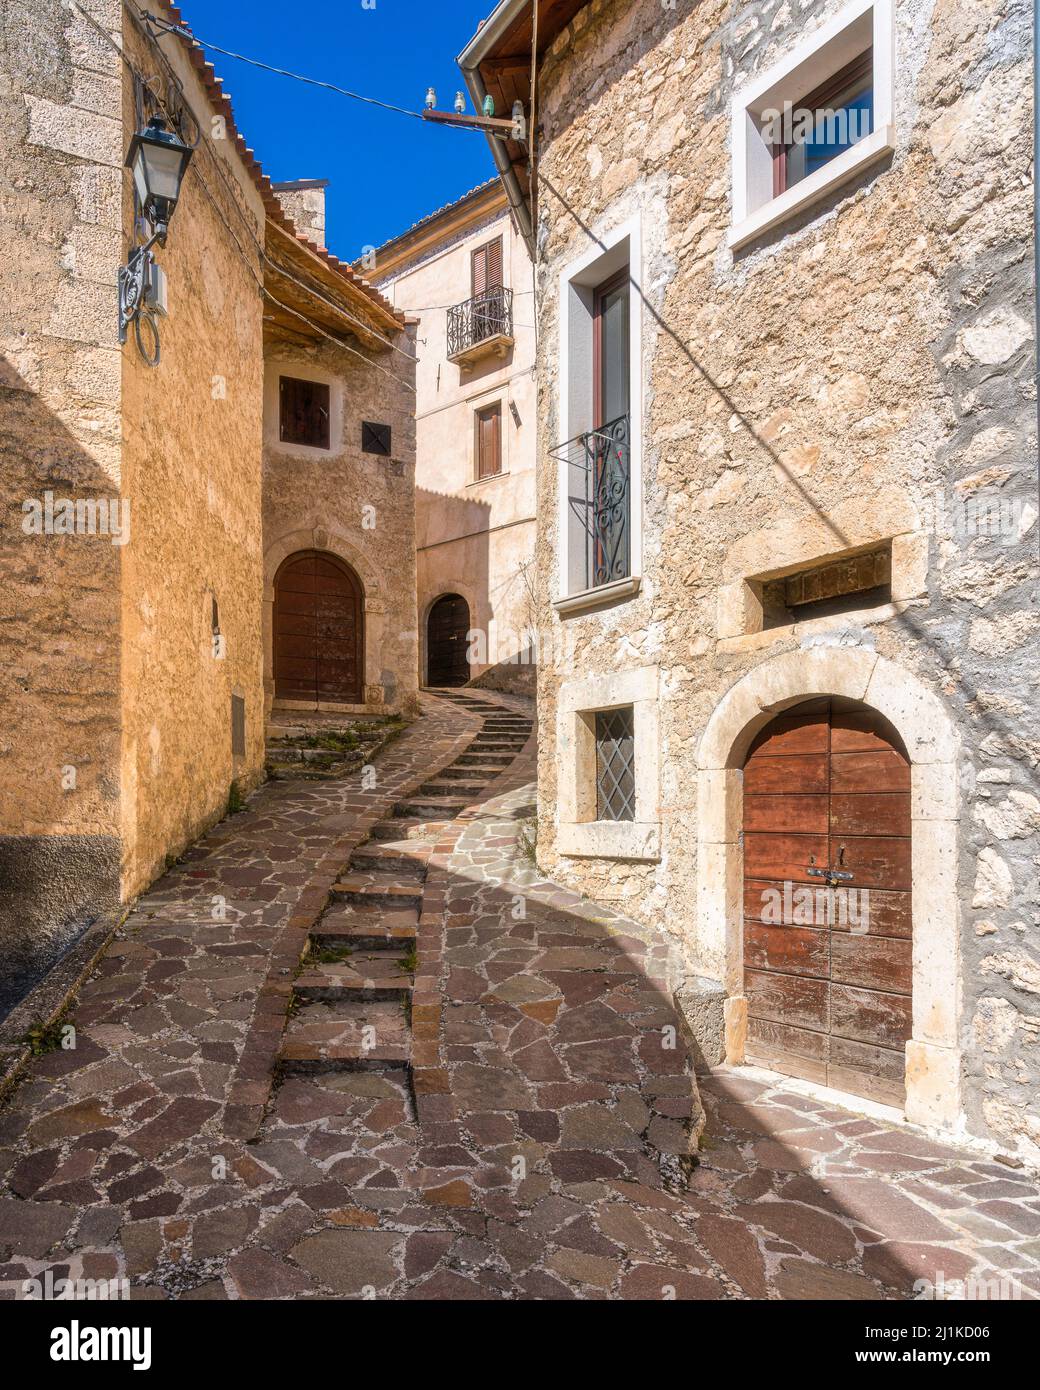 Navelli in spring season, beautiful village in the province of L'Aquila, in the Abruzzo region of central Italy. Stock Photo